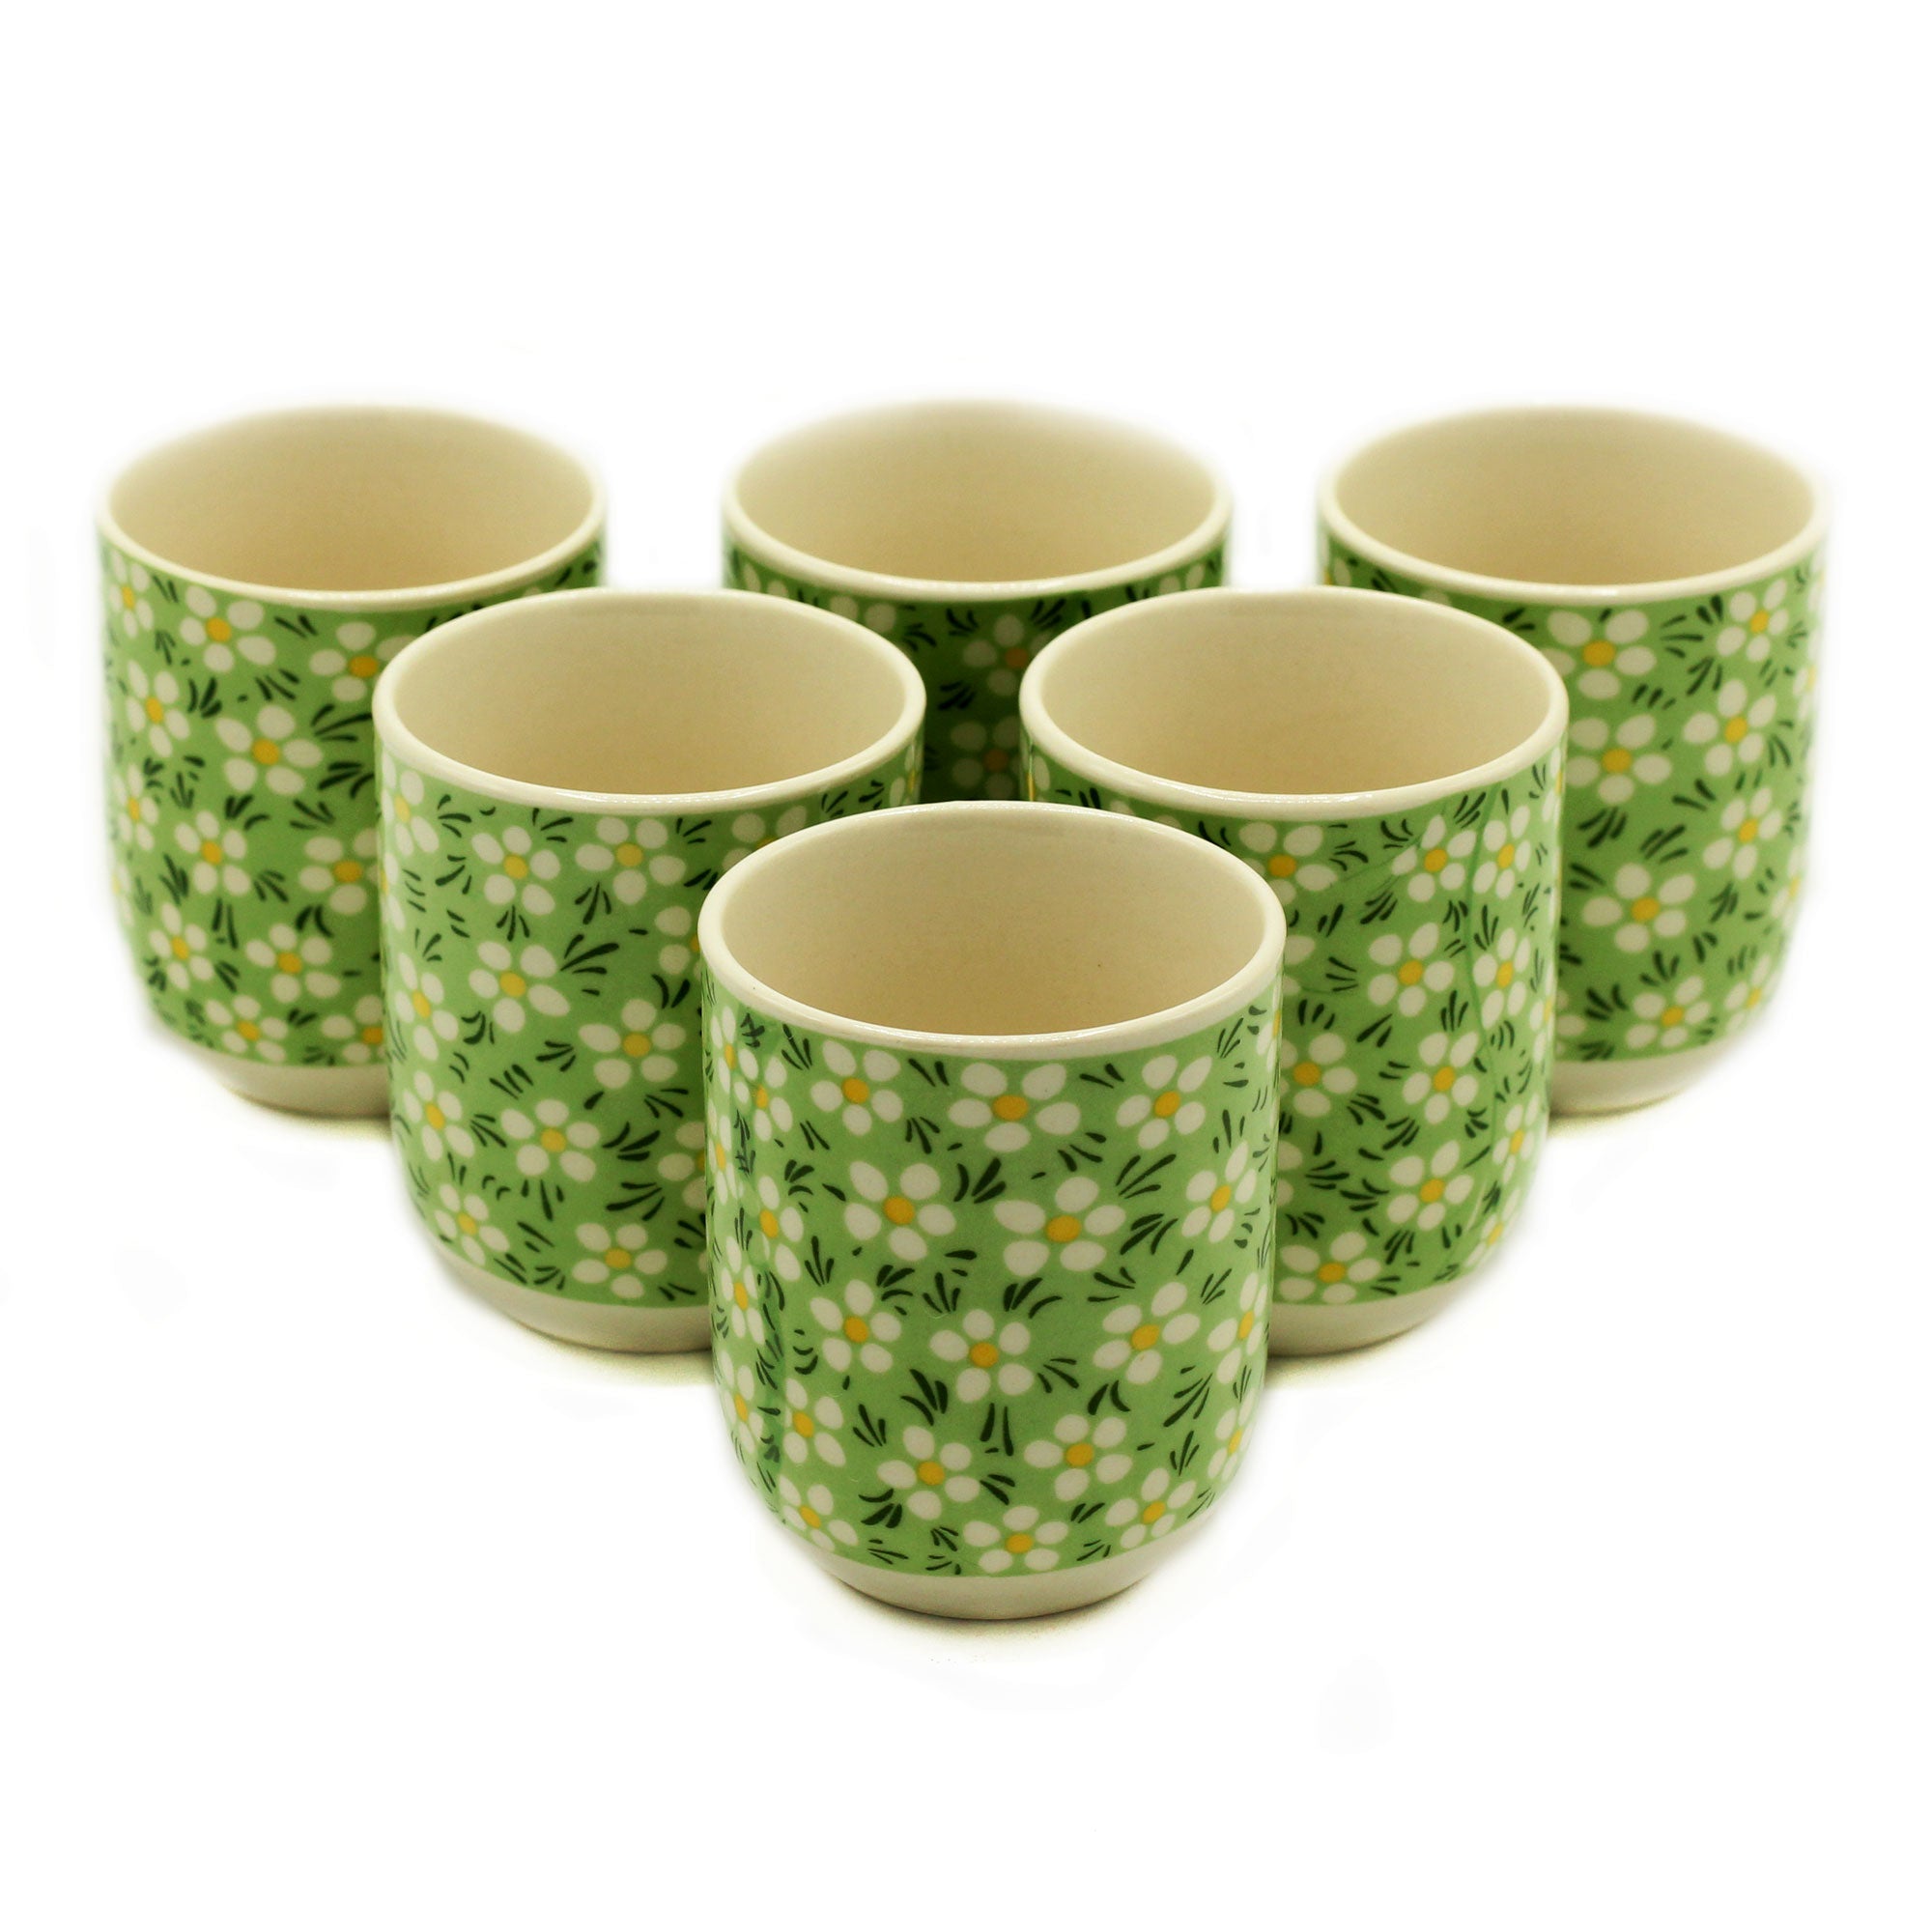 View Herbal Tea Cups Green Daisey information